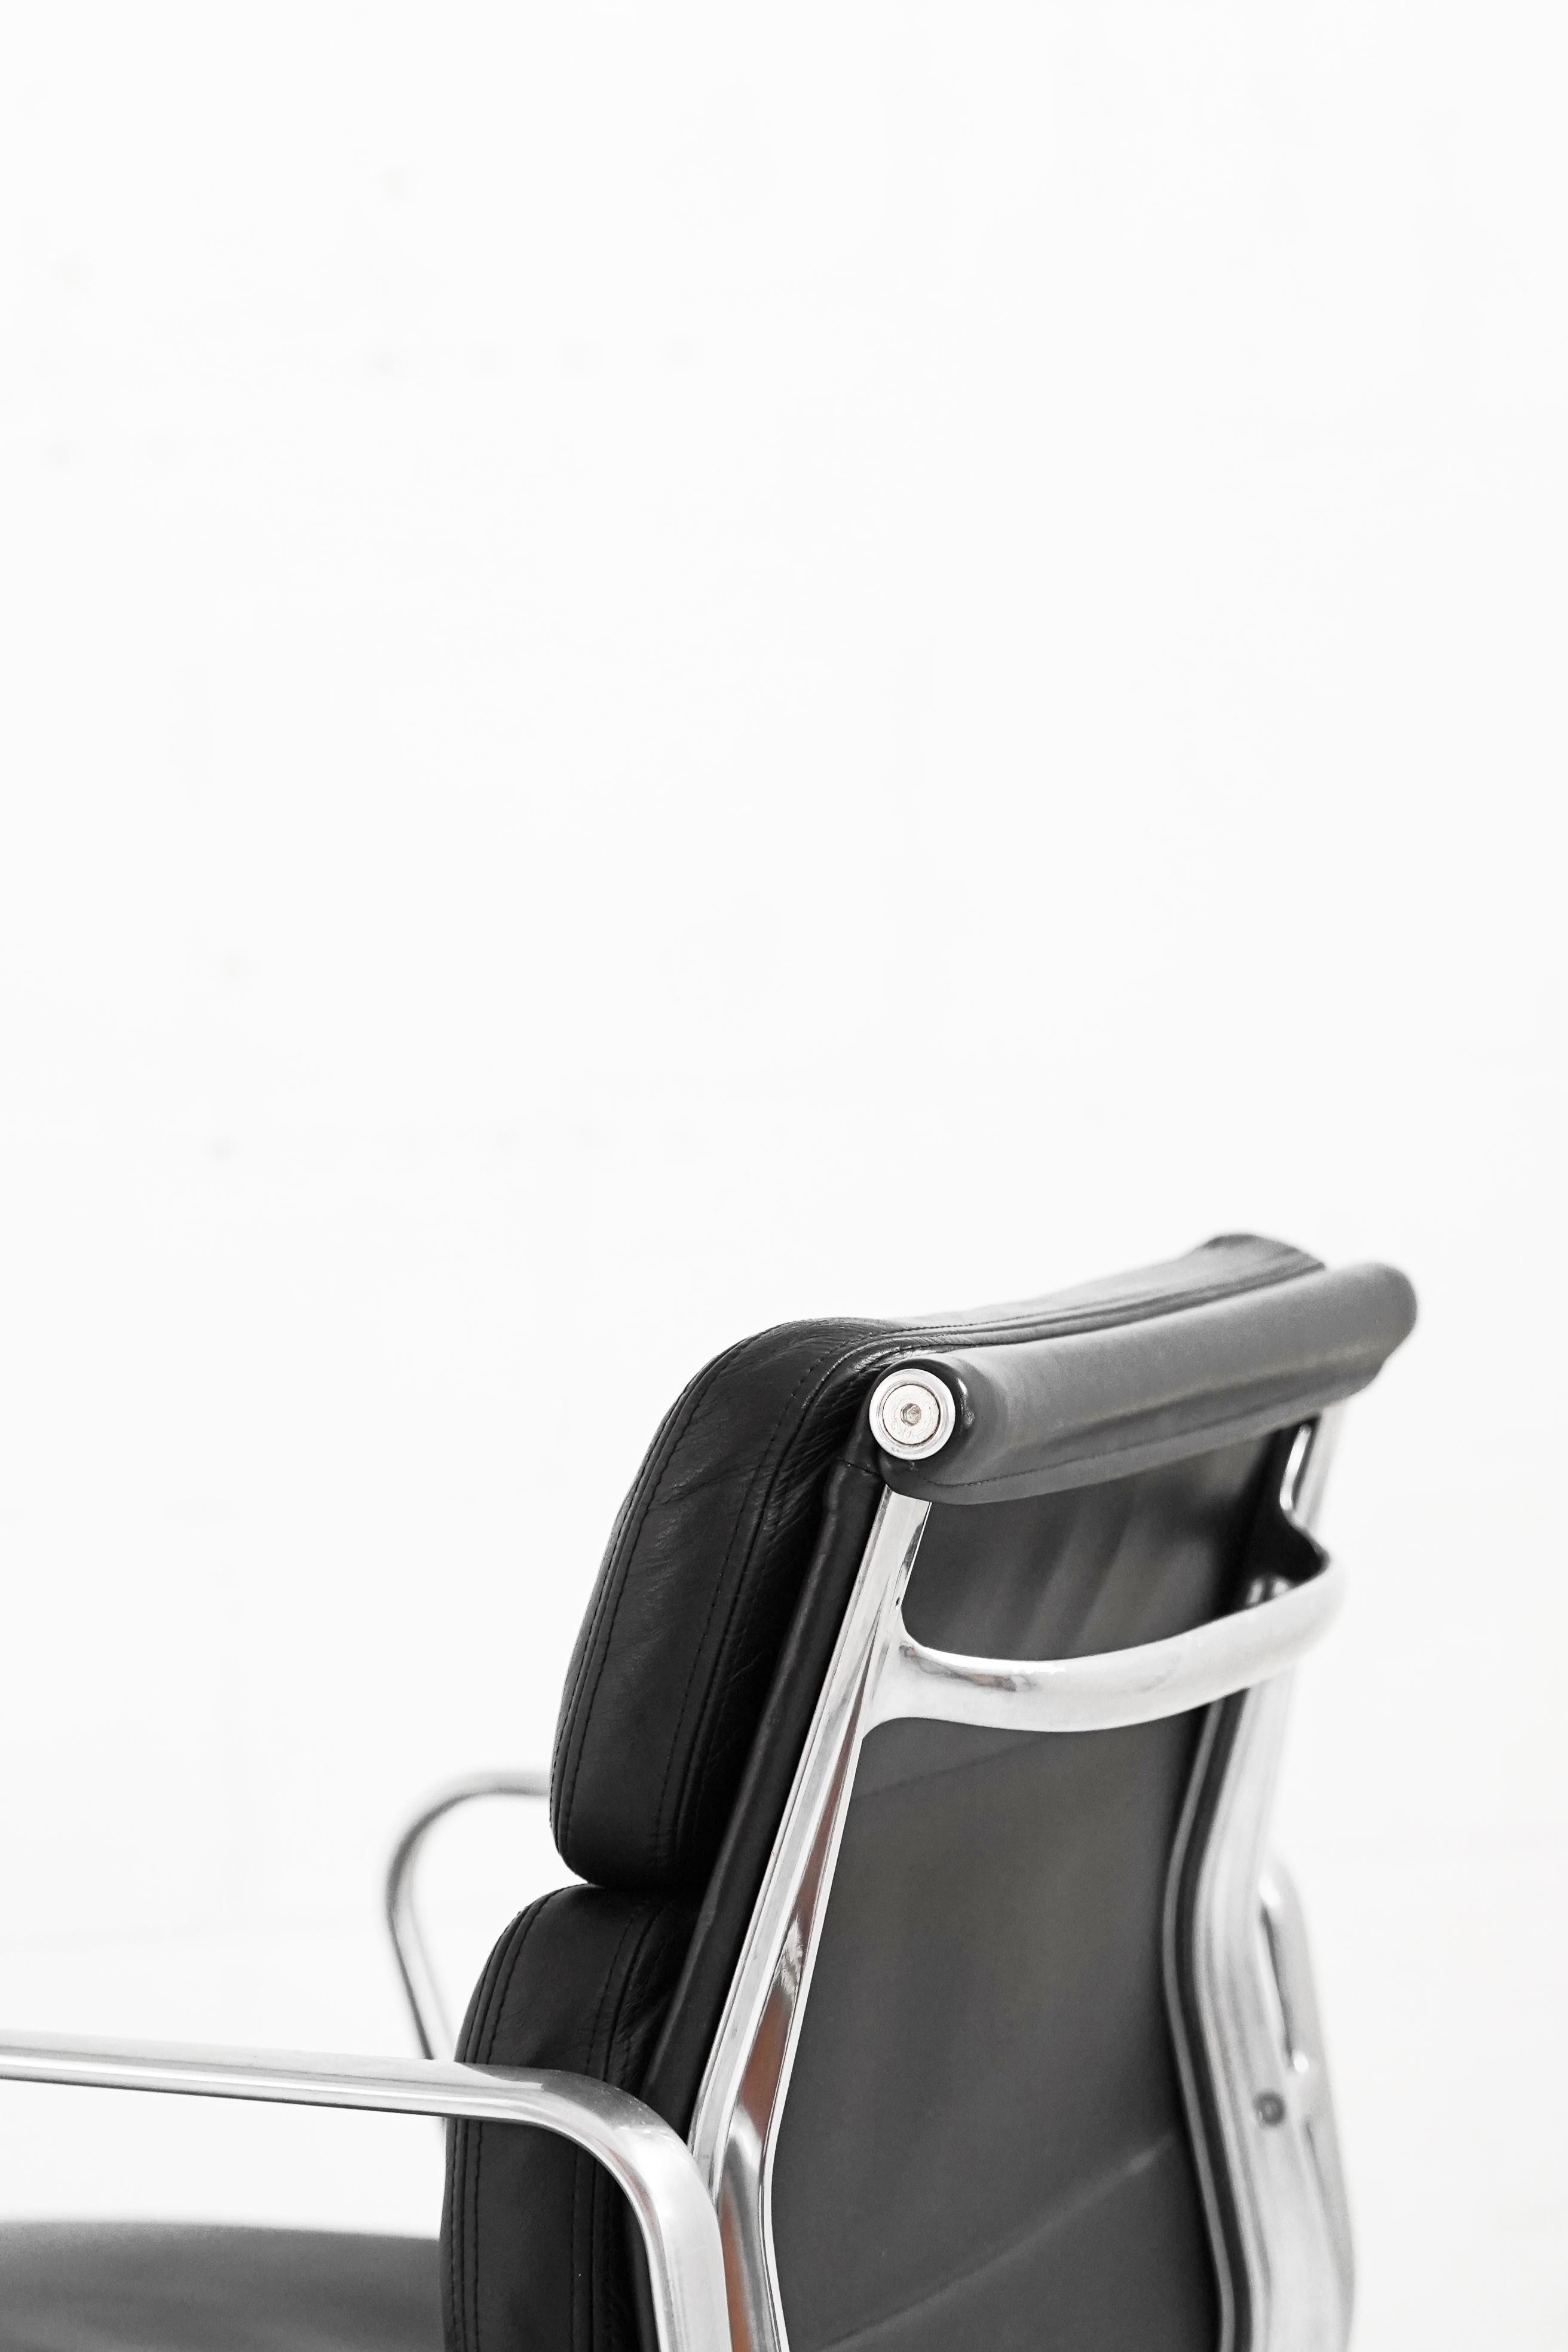 Mid-Century Modern Eames Soft Pad Management Chair by Charles and Ray Eames for Herman Miller